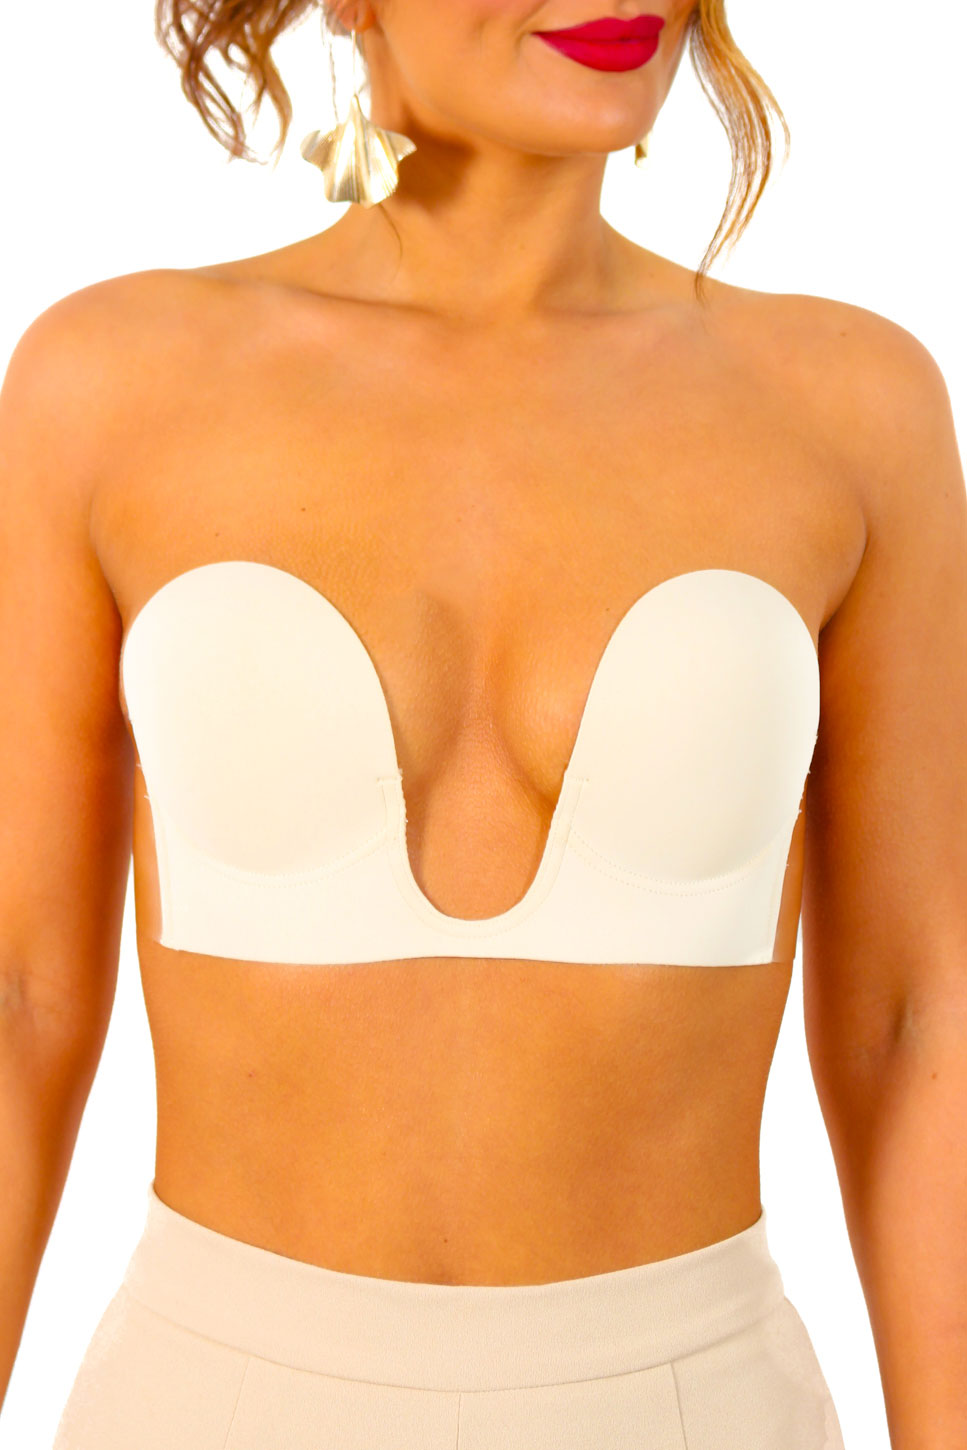 The Party Bra - Stick on Bra - A to G Cup - Ultra Sticky for Maximum Hold